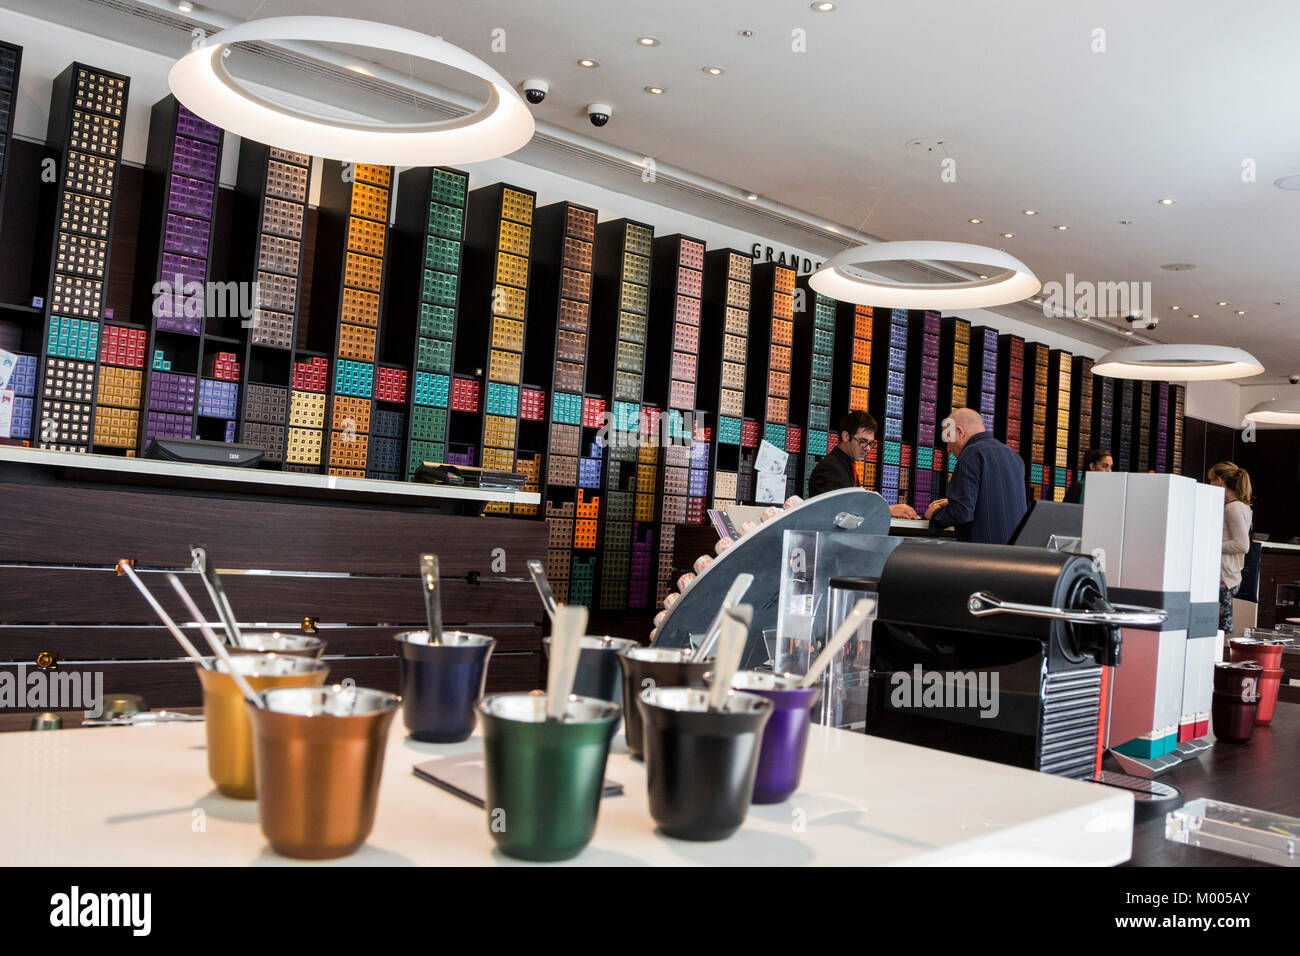 Nespresso Coffee Shop High Resolution Stock Photography and Images - Alamy